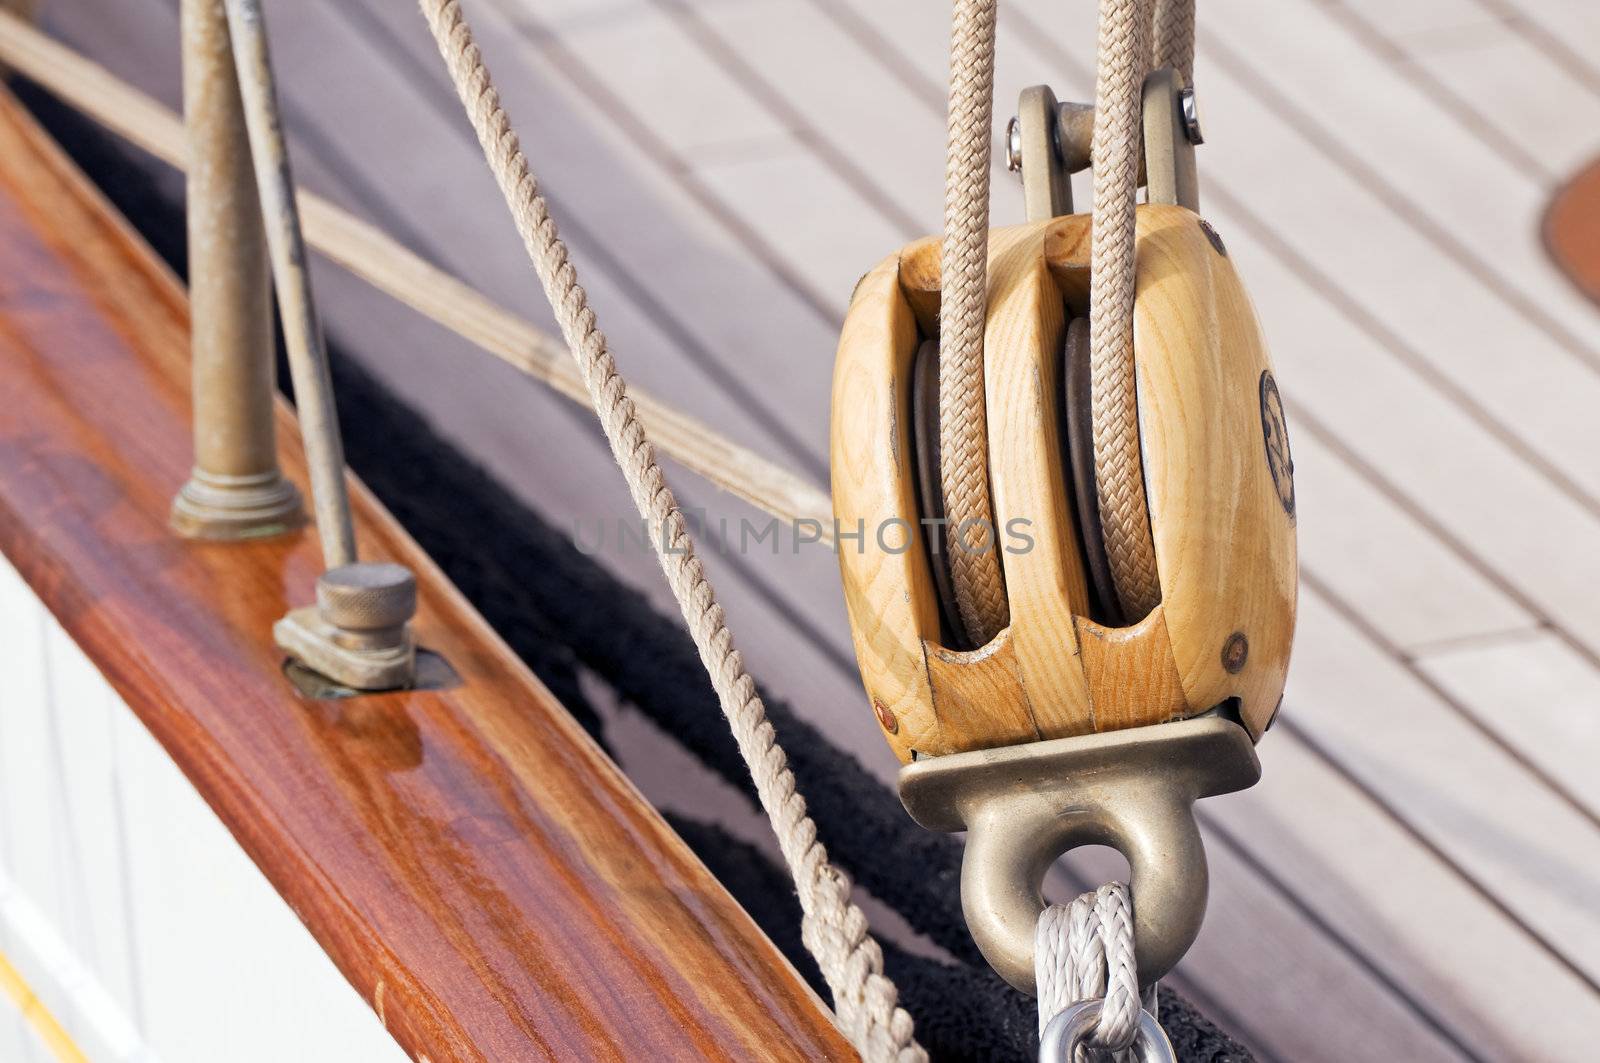 Detail of a wooden sailboat: pulley with ropes